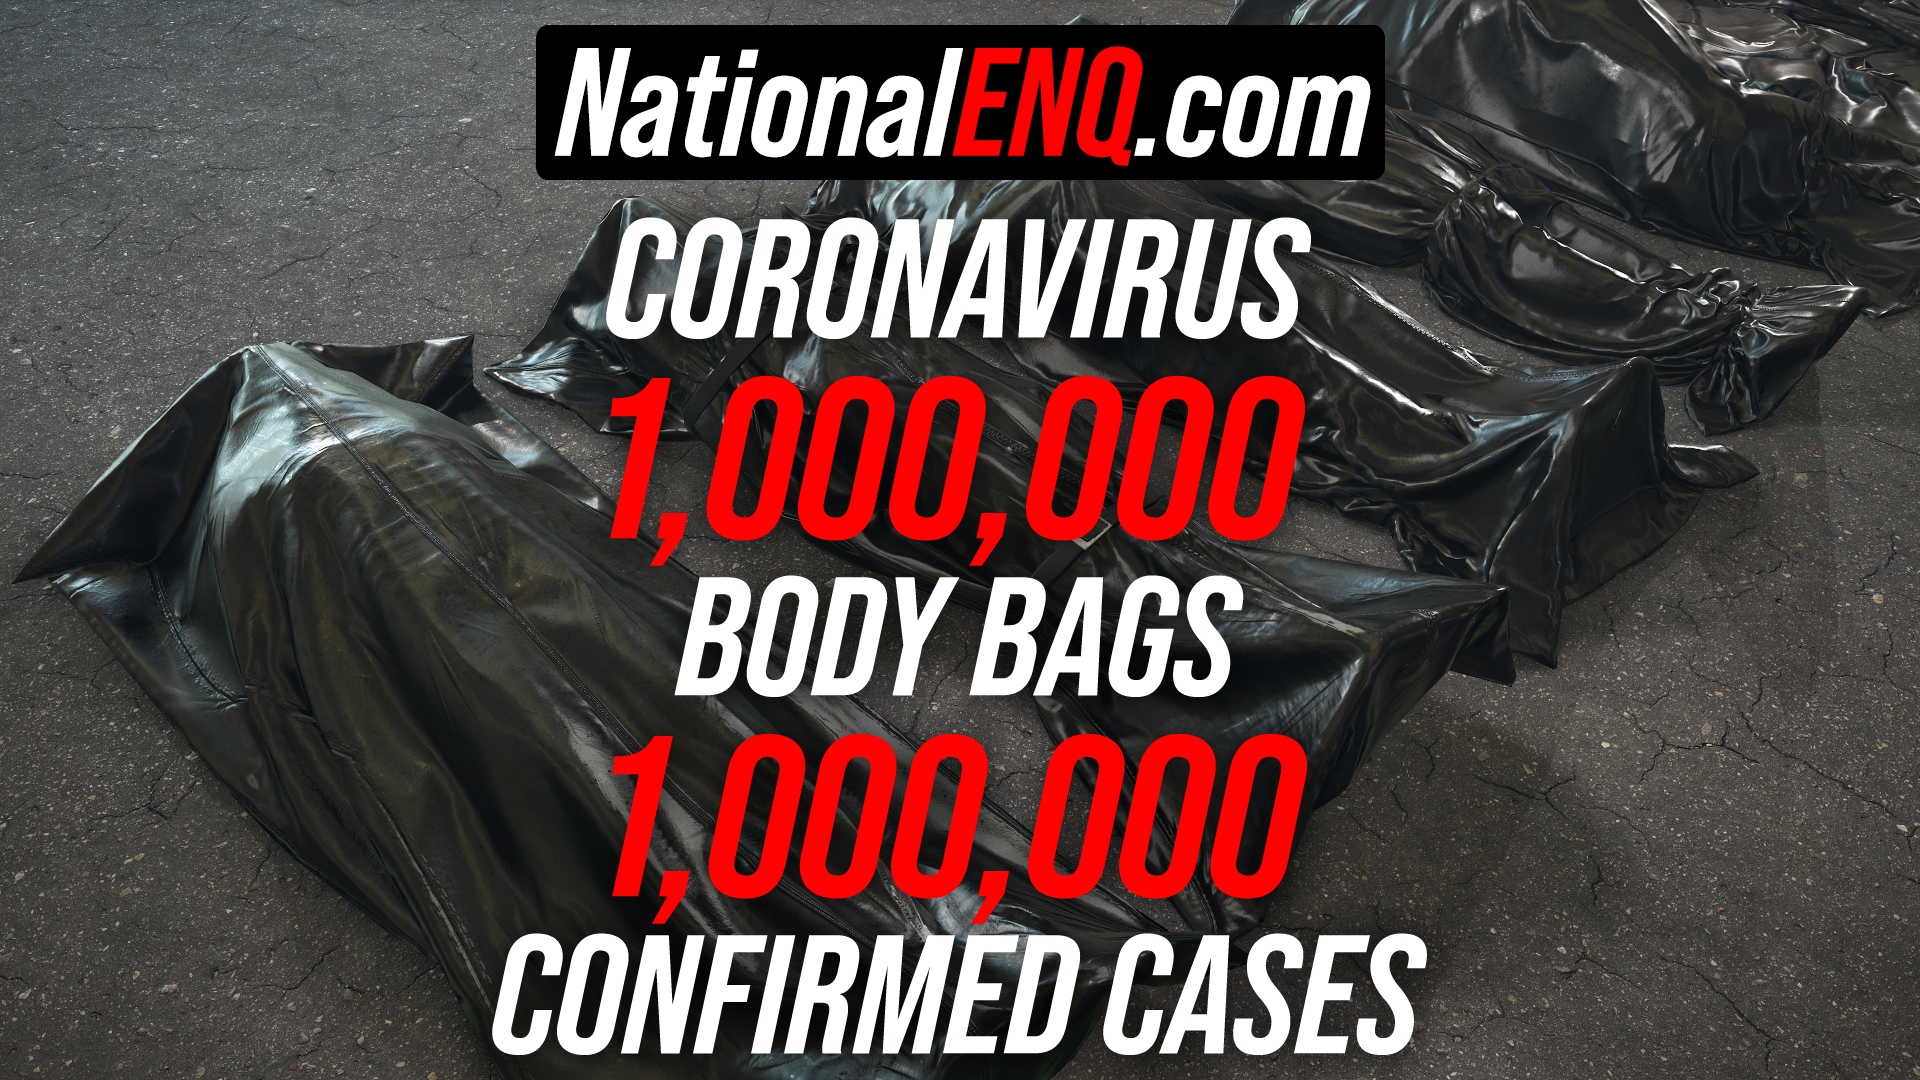 President Donald J. Trump Approved the Delivery of 1,000,000 Body Bags from The Pentagon to FEMA, as Coronavirus (COVID-19) Pandemic Worsens – National ENQ White House Sources Confirm